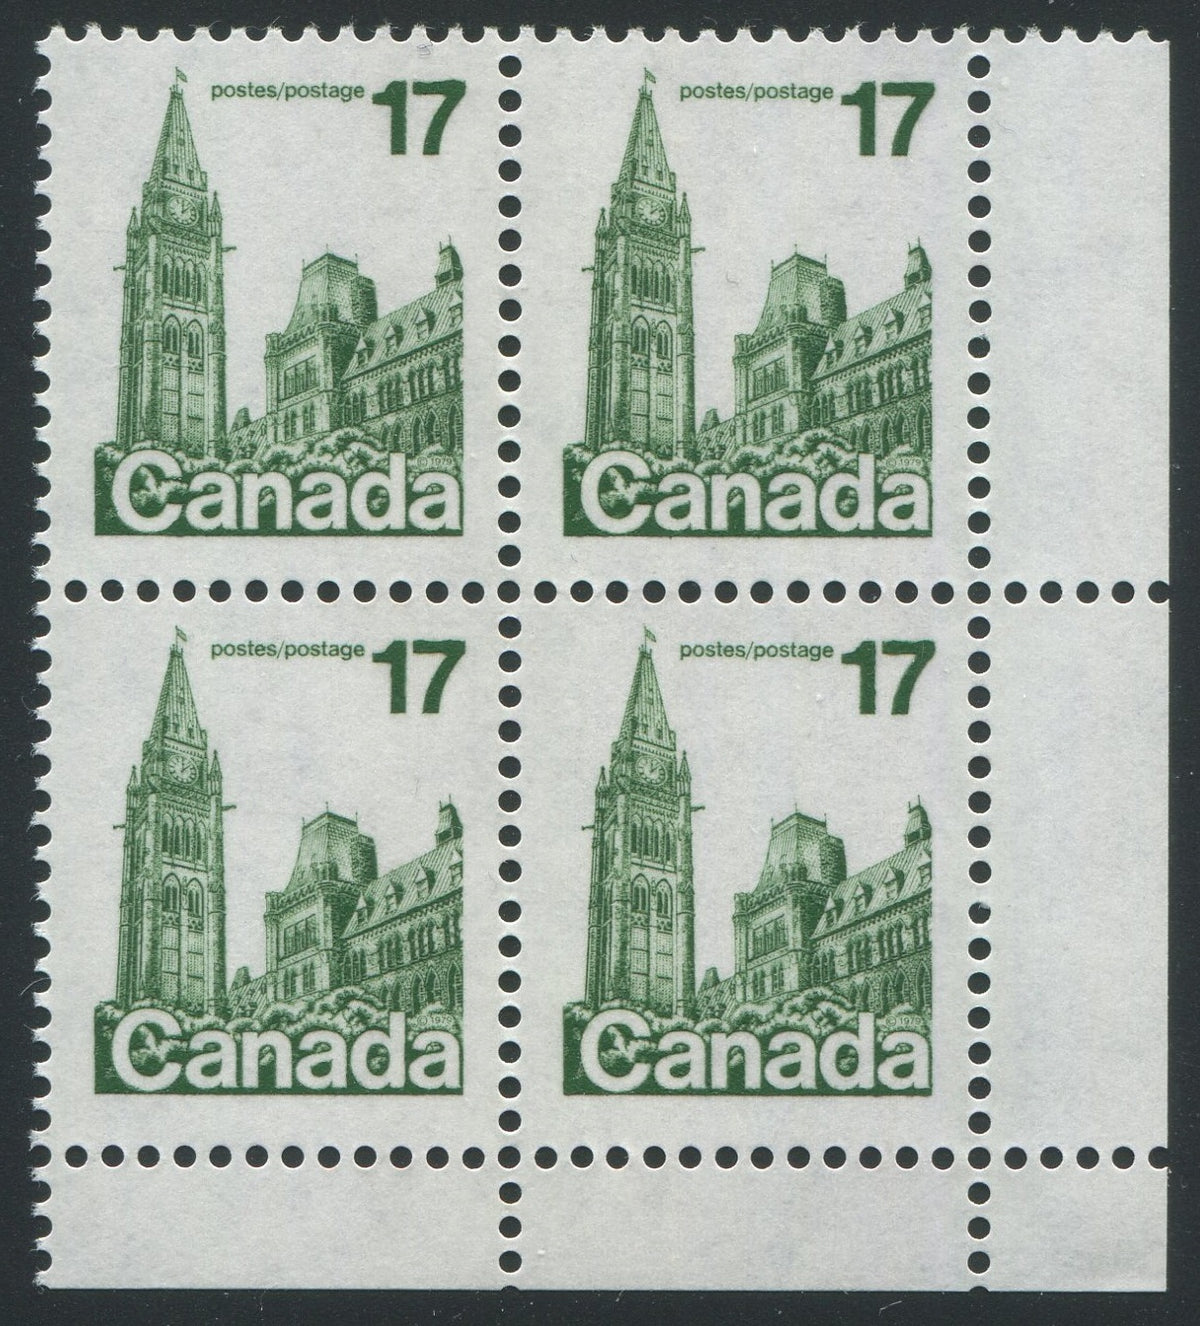 0790CA2007 - Canada #790 - Mint Corner Block of 4, Double Tagging Variety